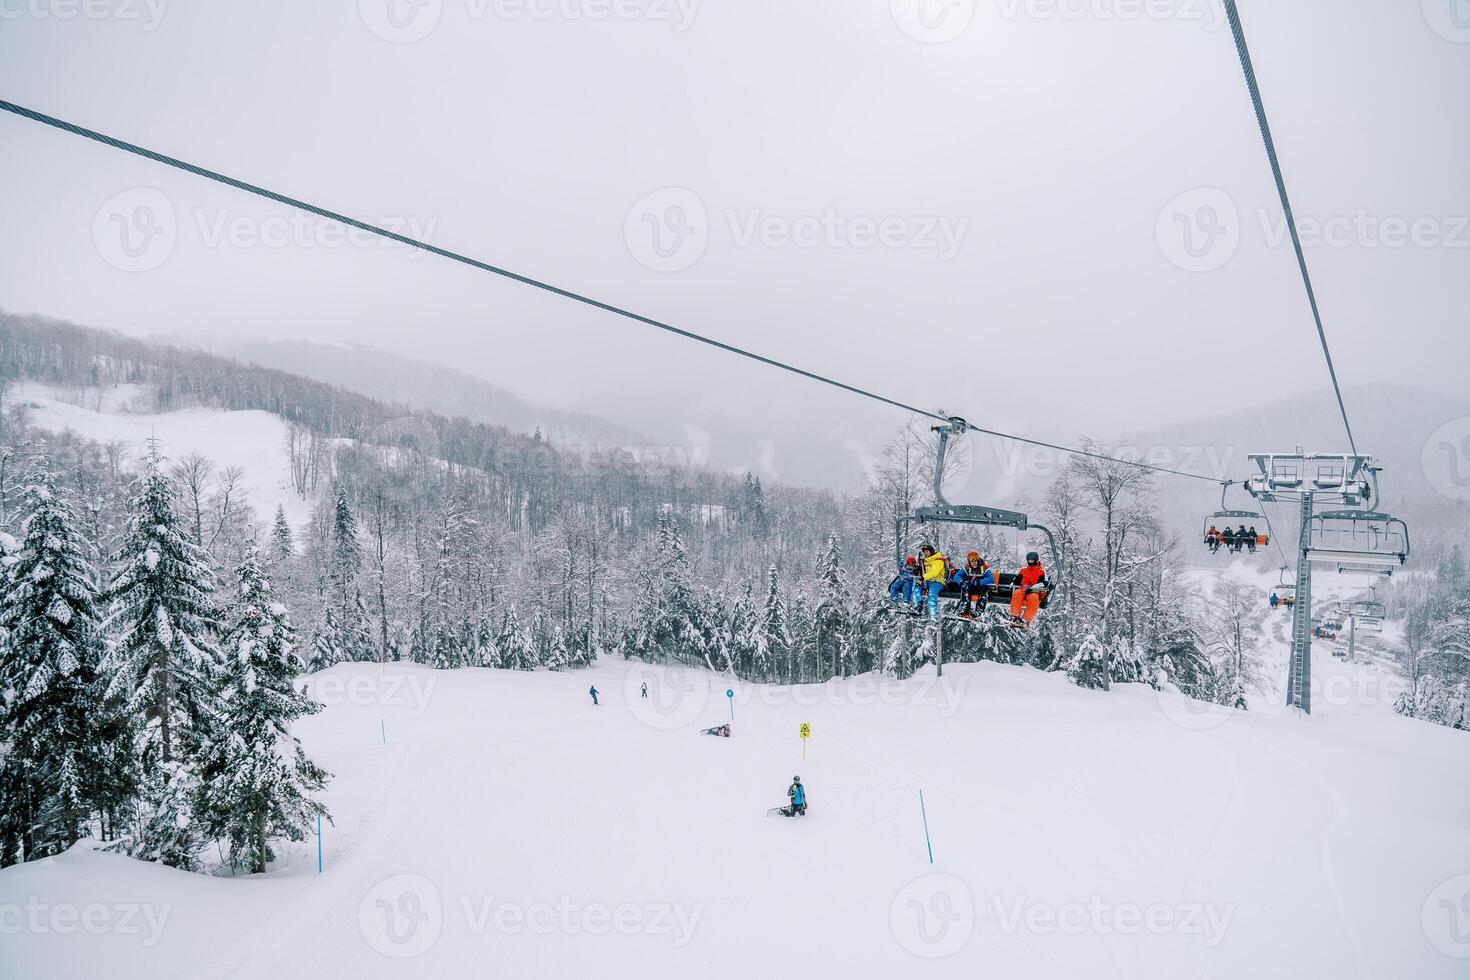 Tourists ride on a chairlift above the forest and ski slope with skiers skiing photo